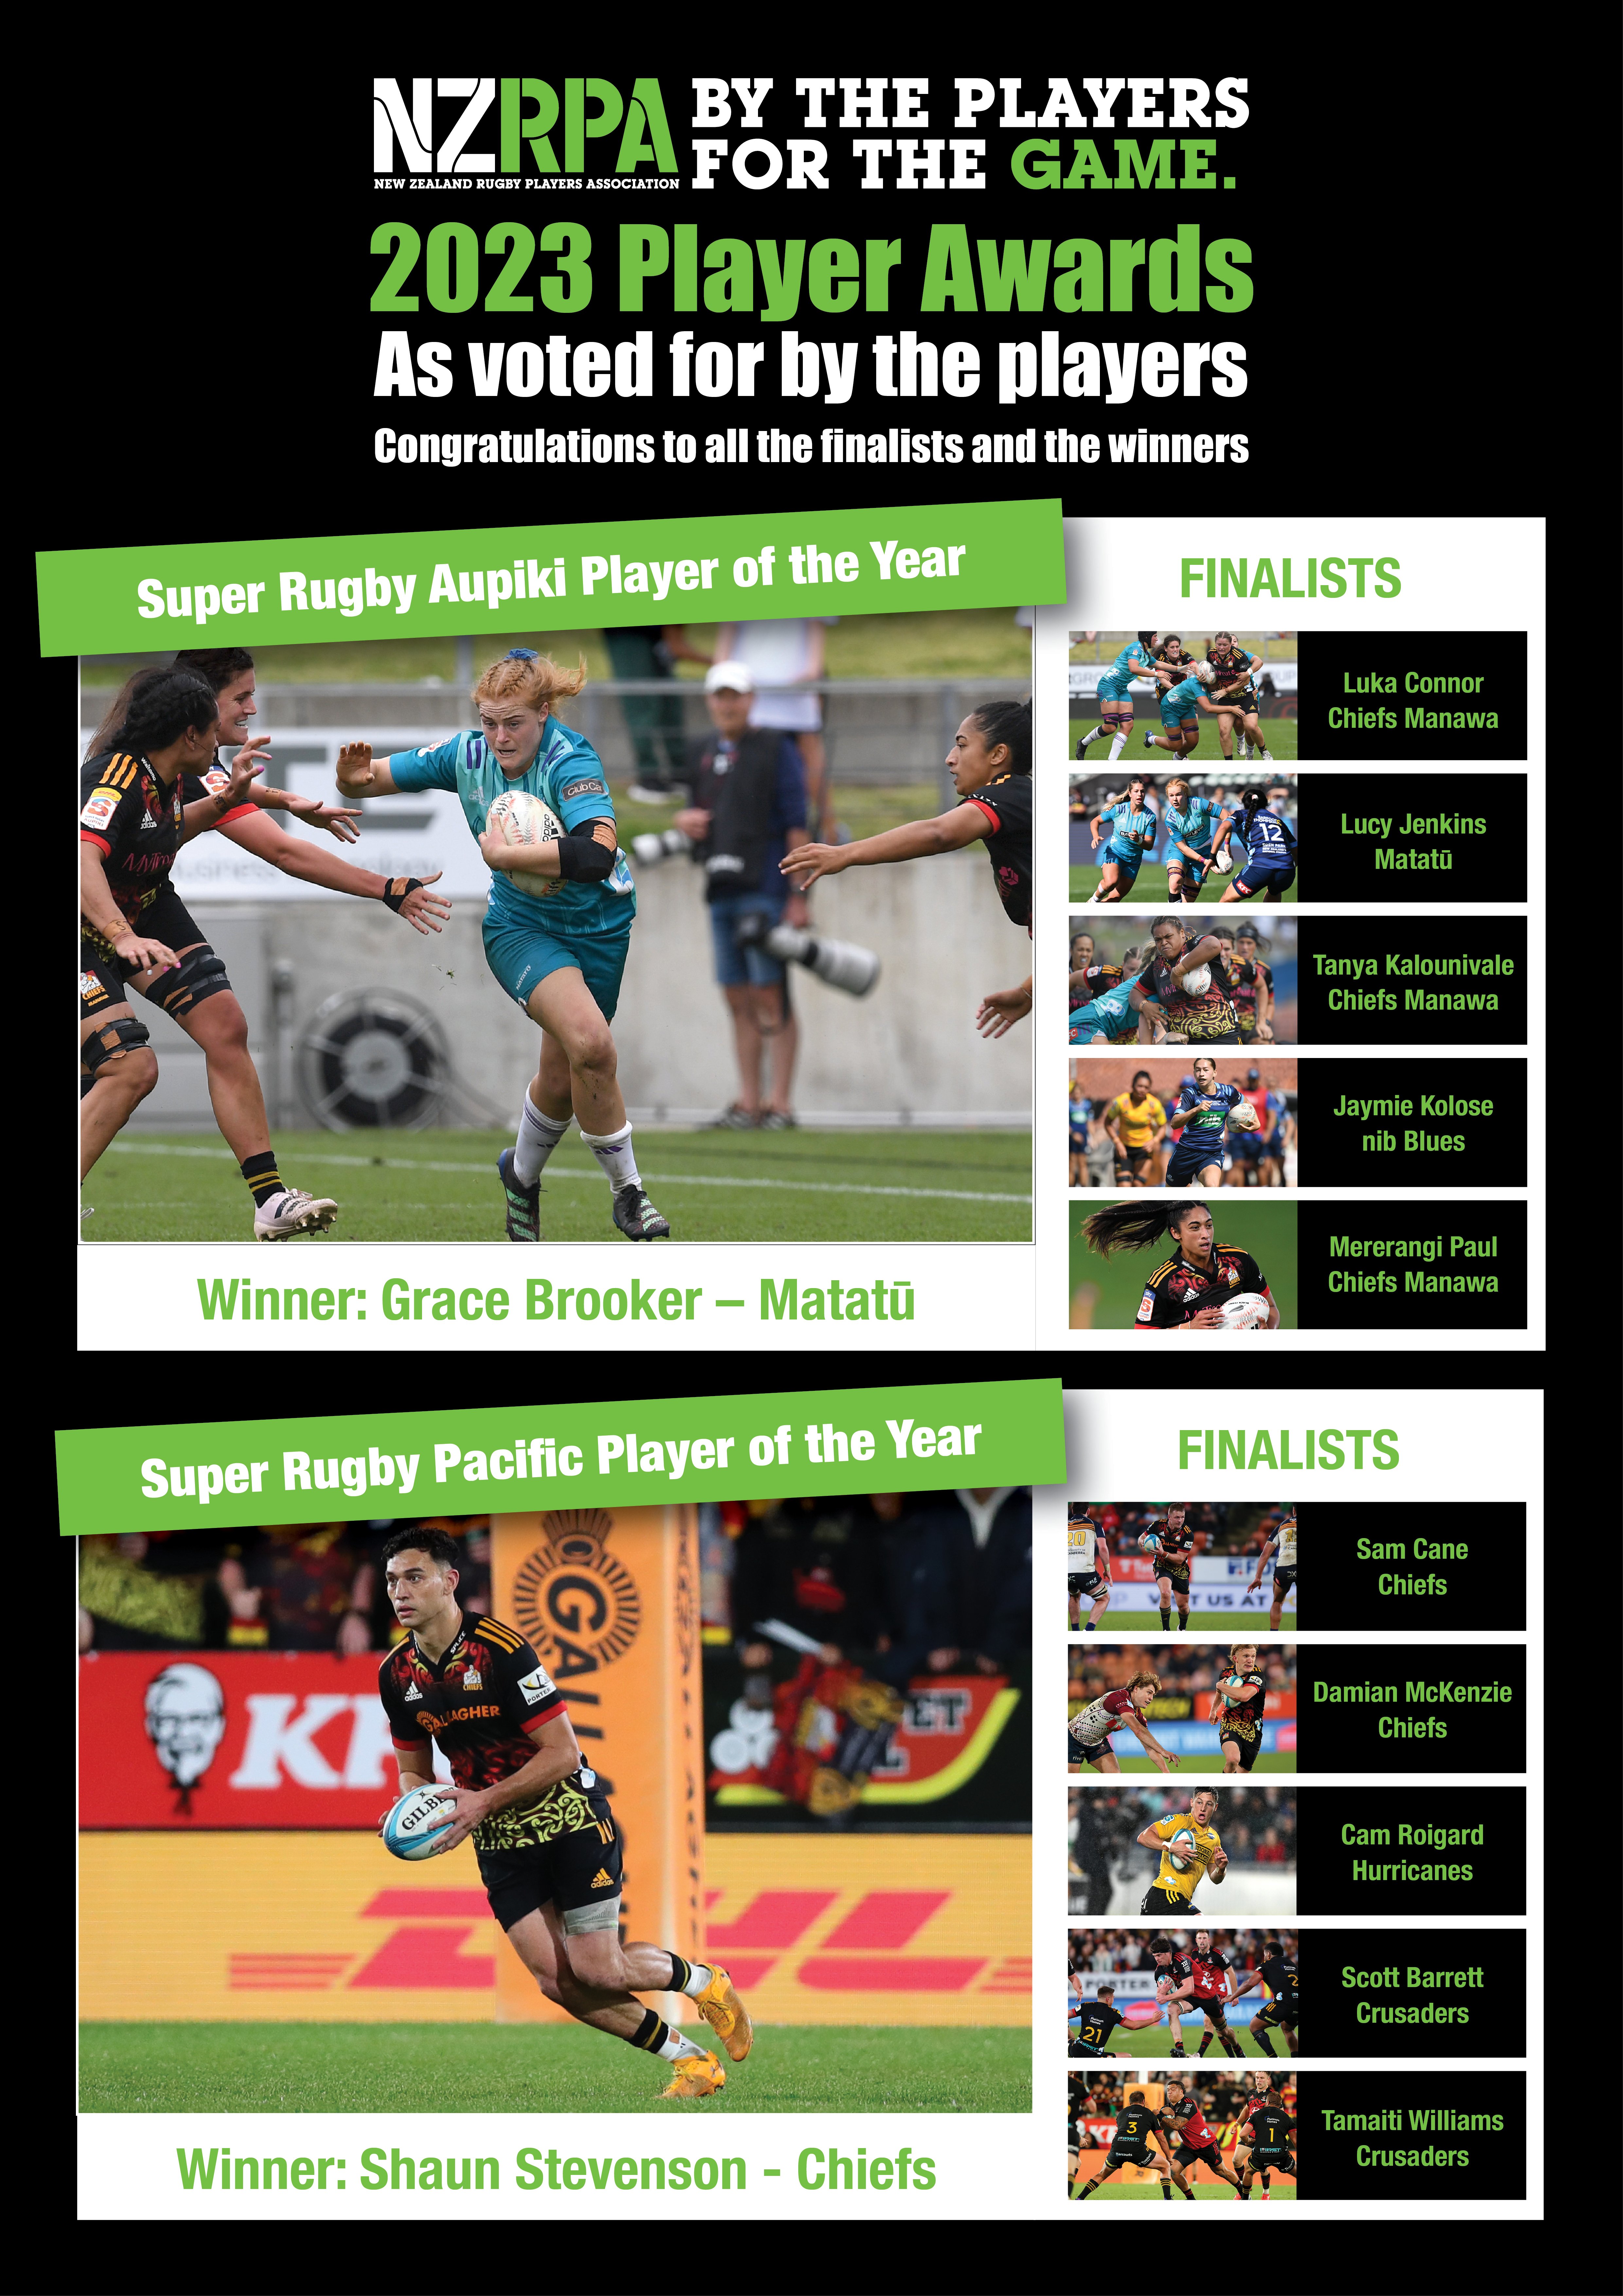 NZRPA Super Rugby Awards finalists and winners announced